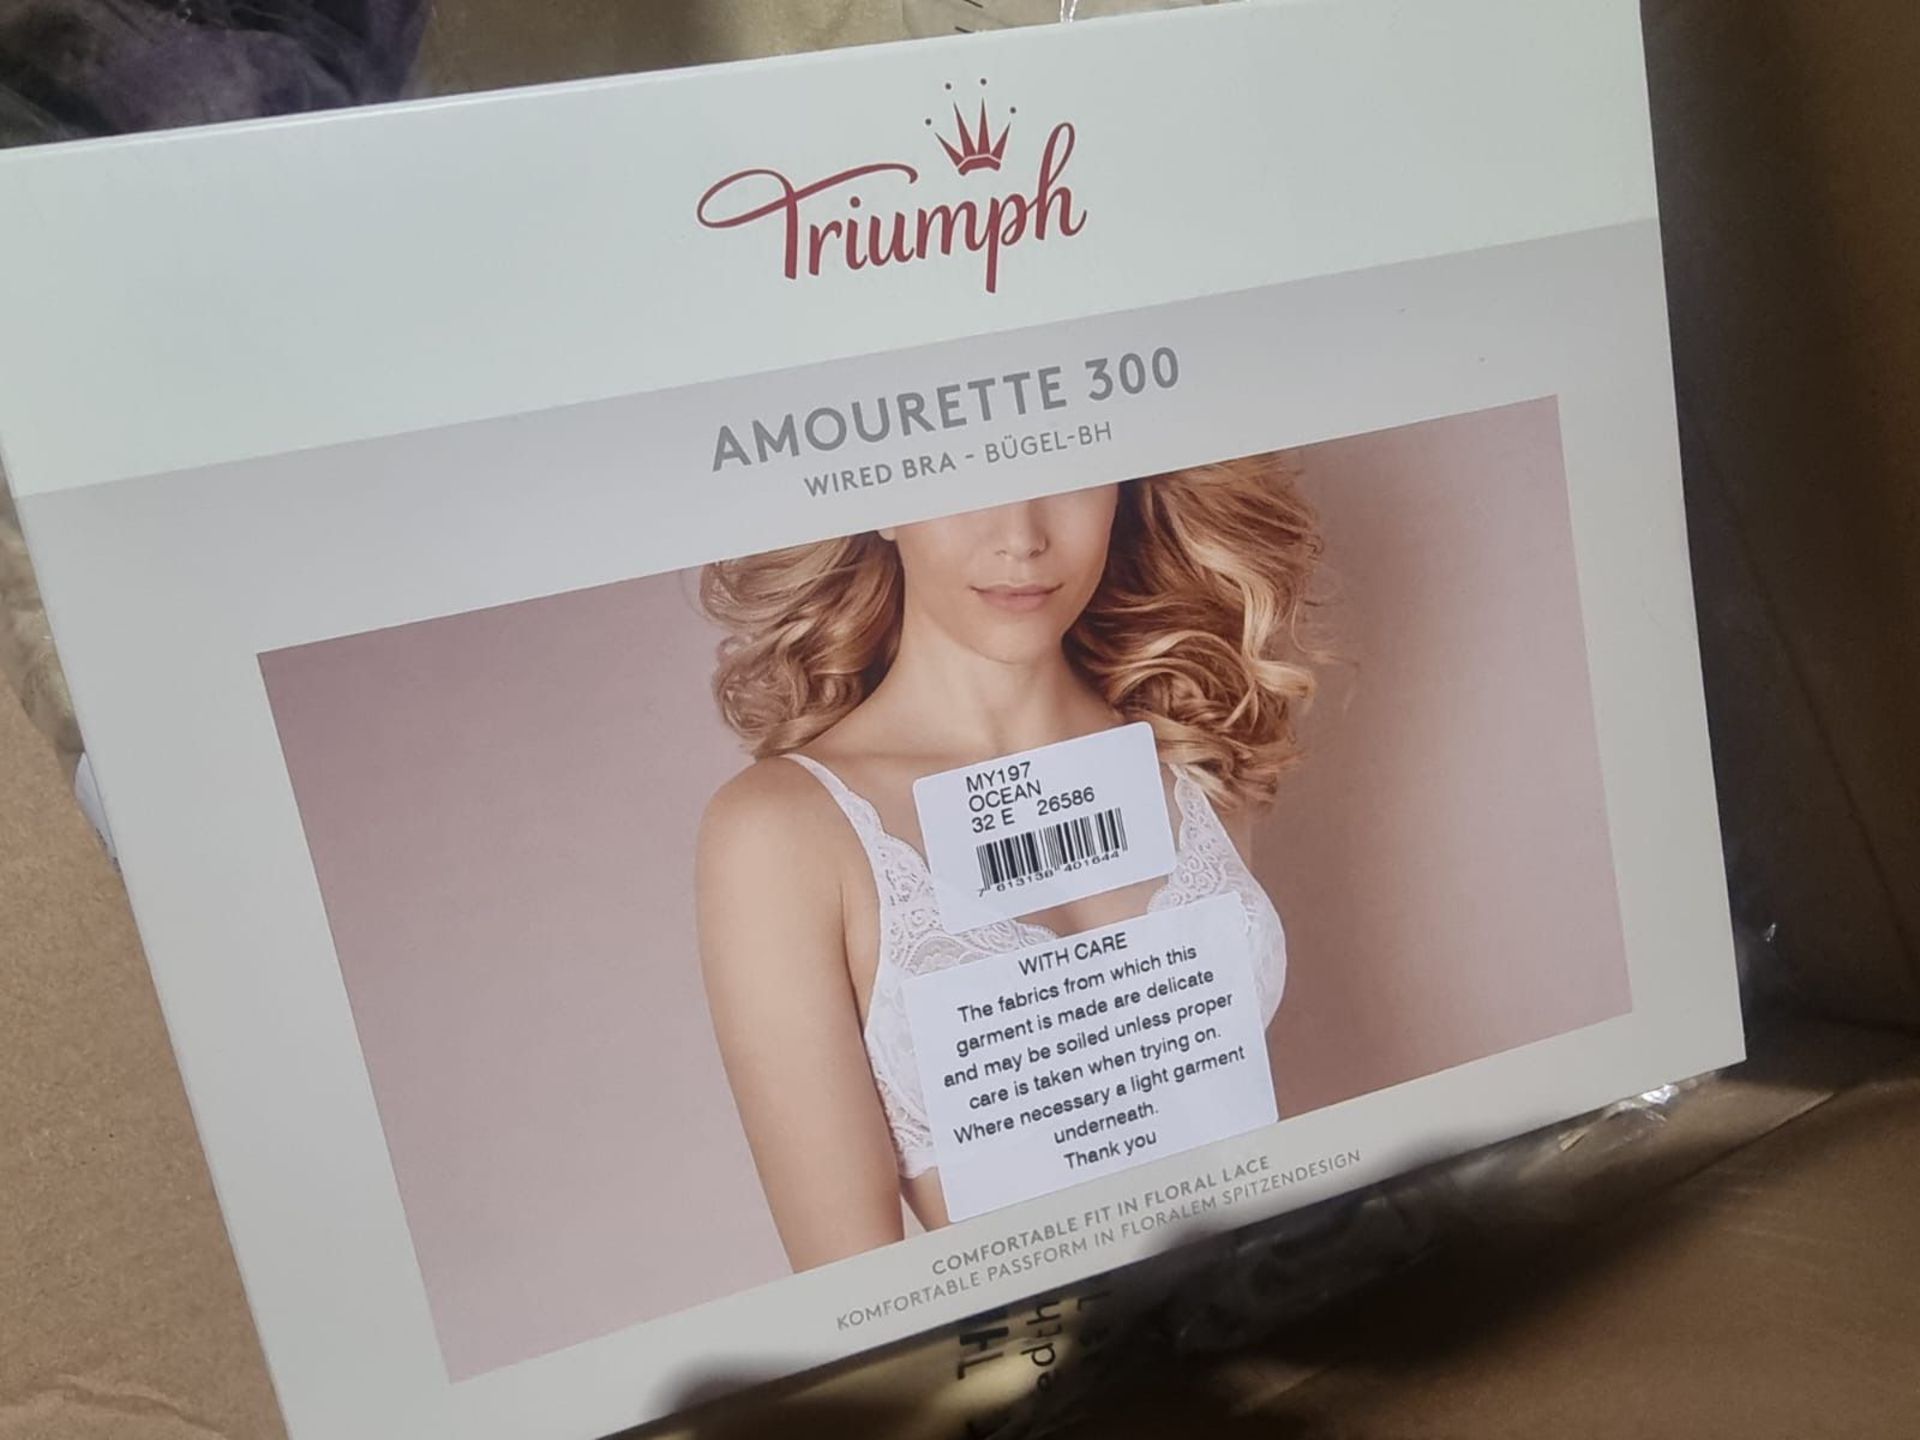 100 x NEW PACKAGED ASSORTED SWIM & UNDERWEAR FROM BRAND SUCH AS WONDERBRA, BOUX AVENUE, ANN SUMMERS, - Image 37 of 53